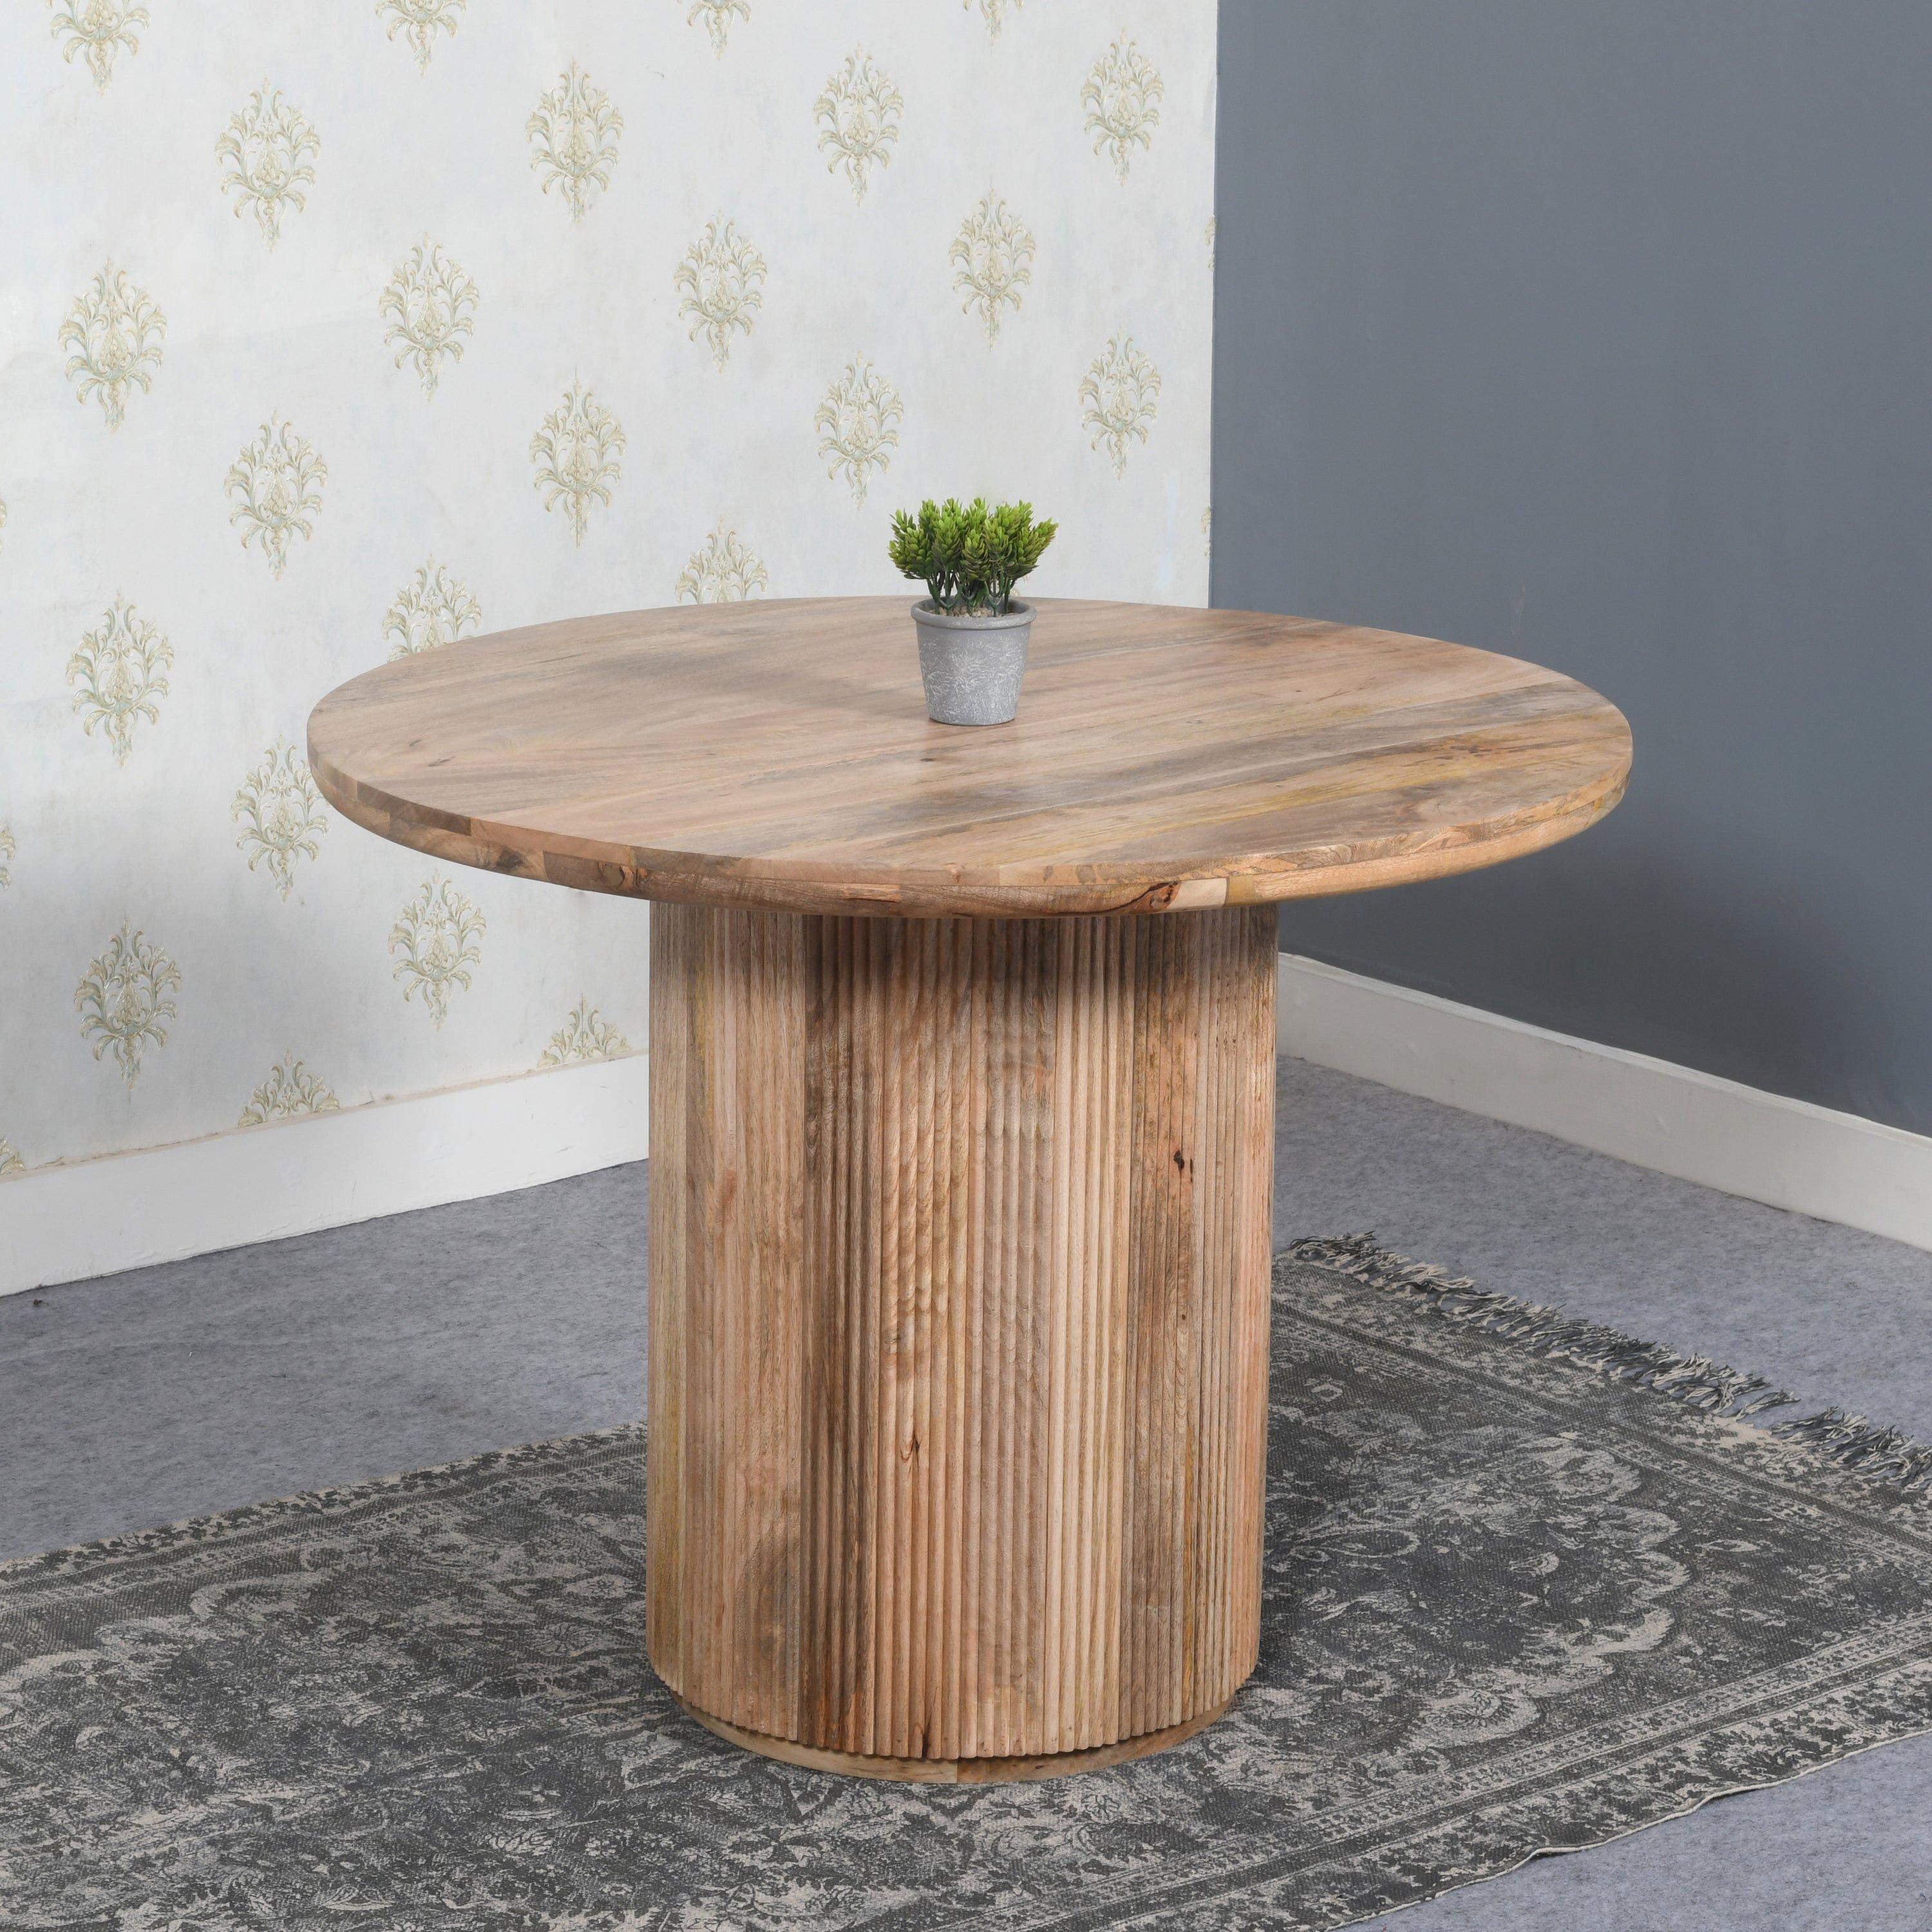 Margarita Natural Solid Wood Round Dining Table - image 1